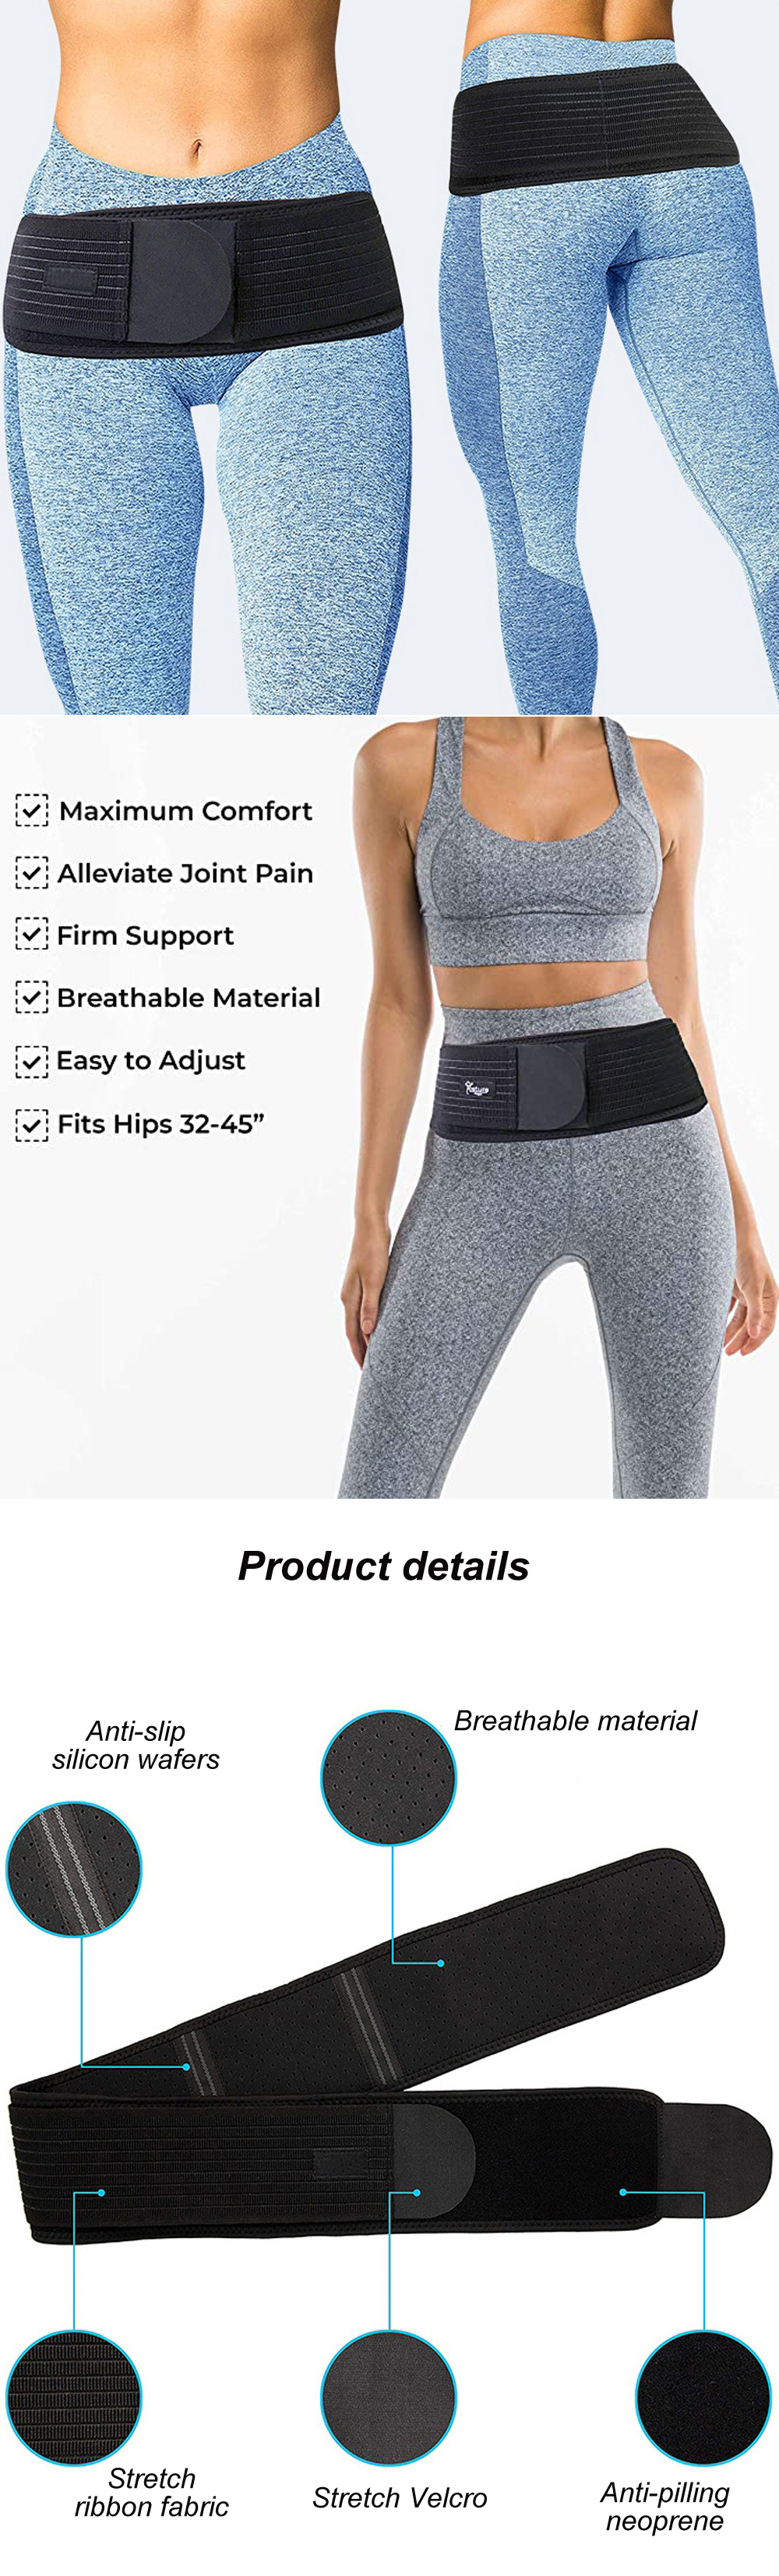 Sacroiliac-SI-Joint-Support-Waist-Belt-Reduce-Sciatic-Pelvic-Lower-Back-and-Leg-Pain-Stabilize-SI-Jo-1918488-3